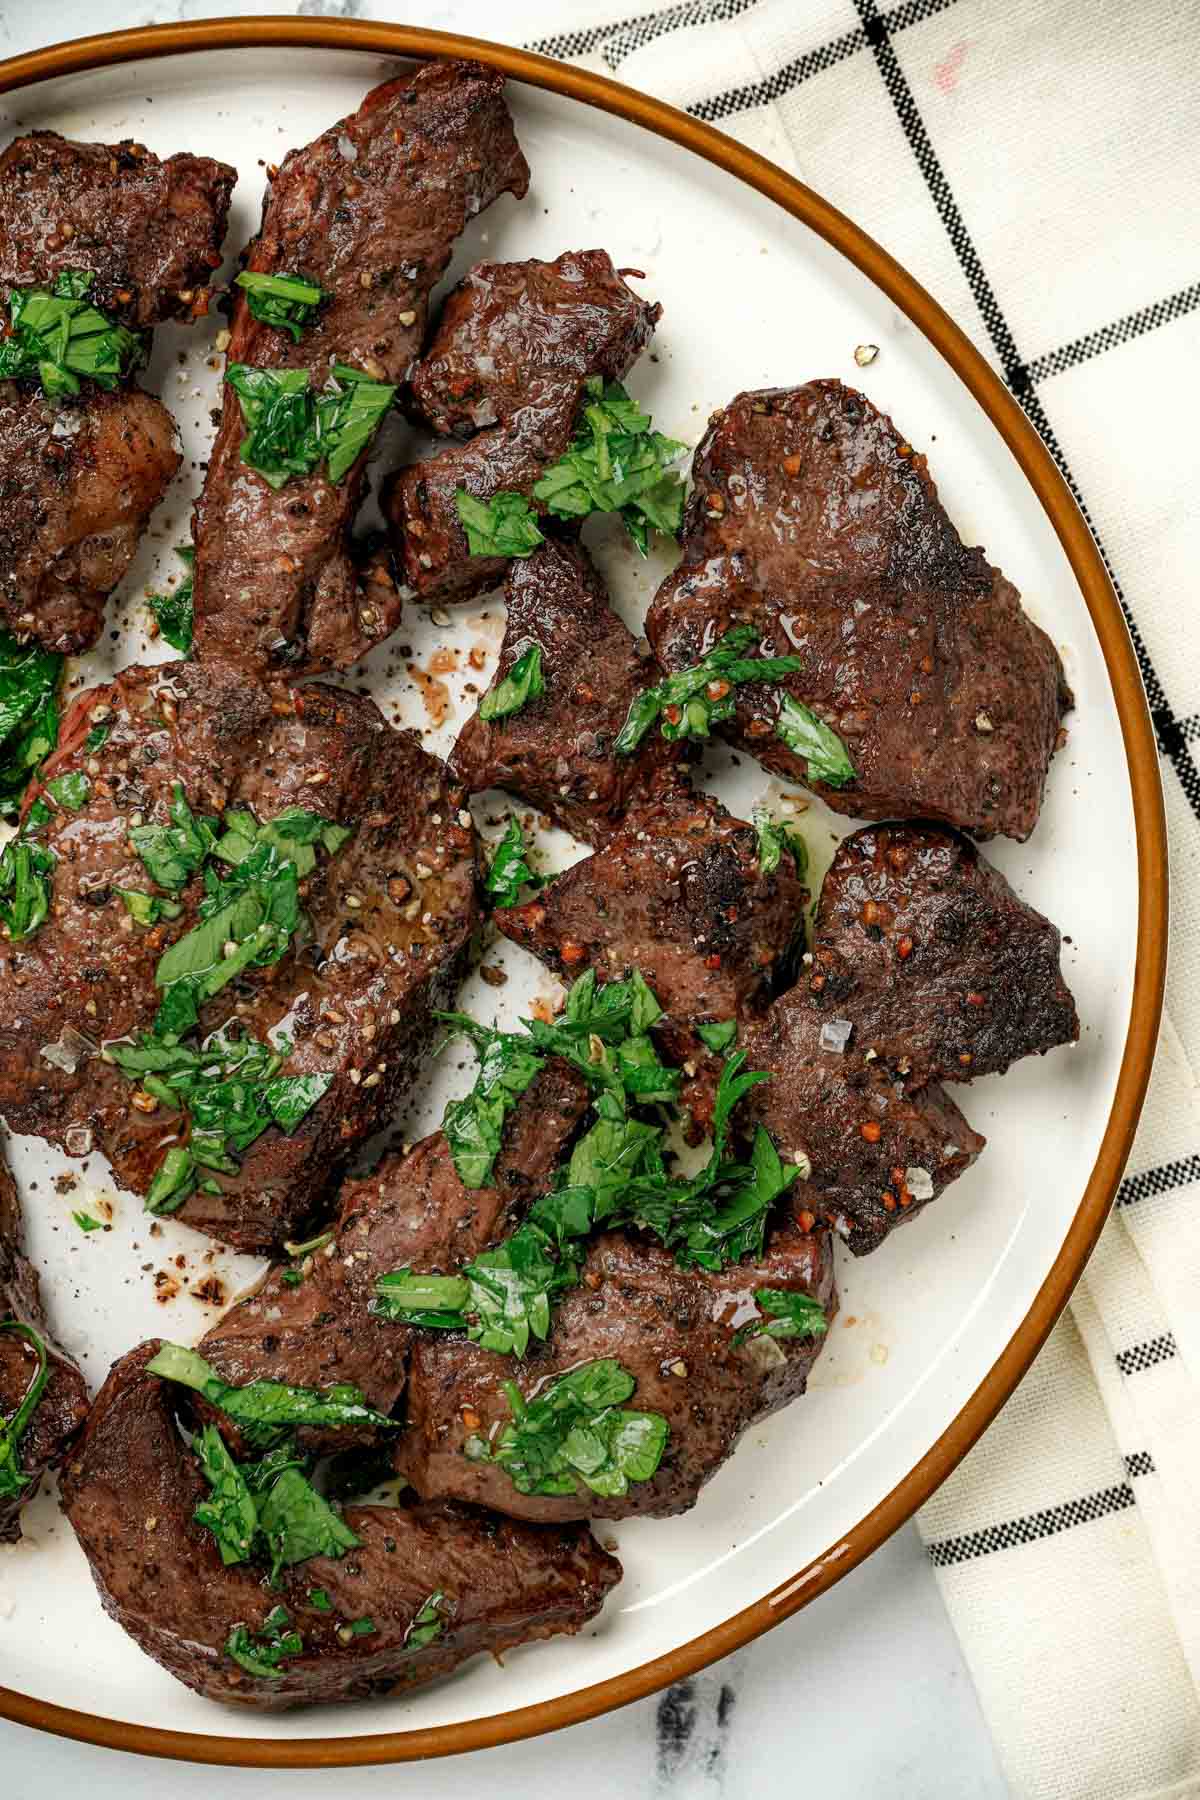 Pieces of beef on a plate with green herb sauce